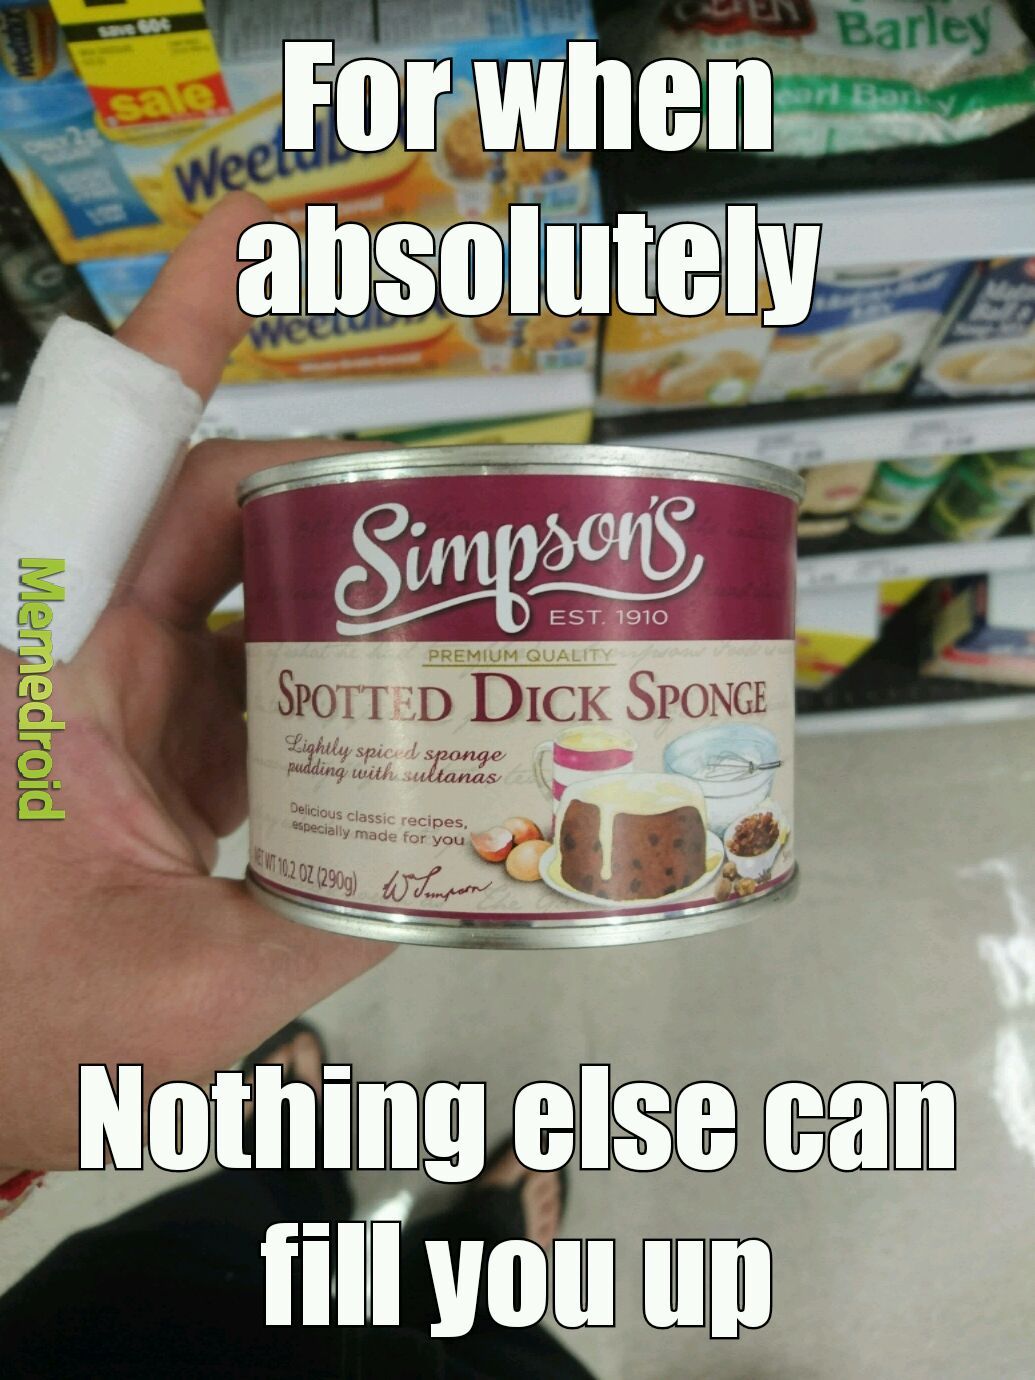 Spotted dick is my favorite kind of dick - meme